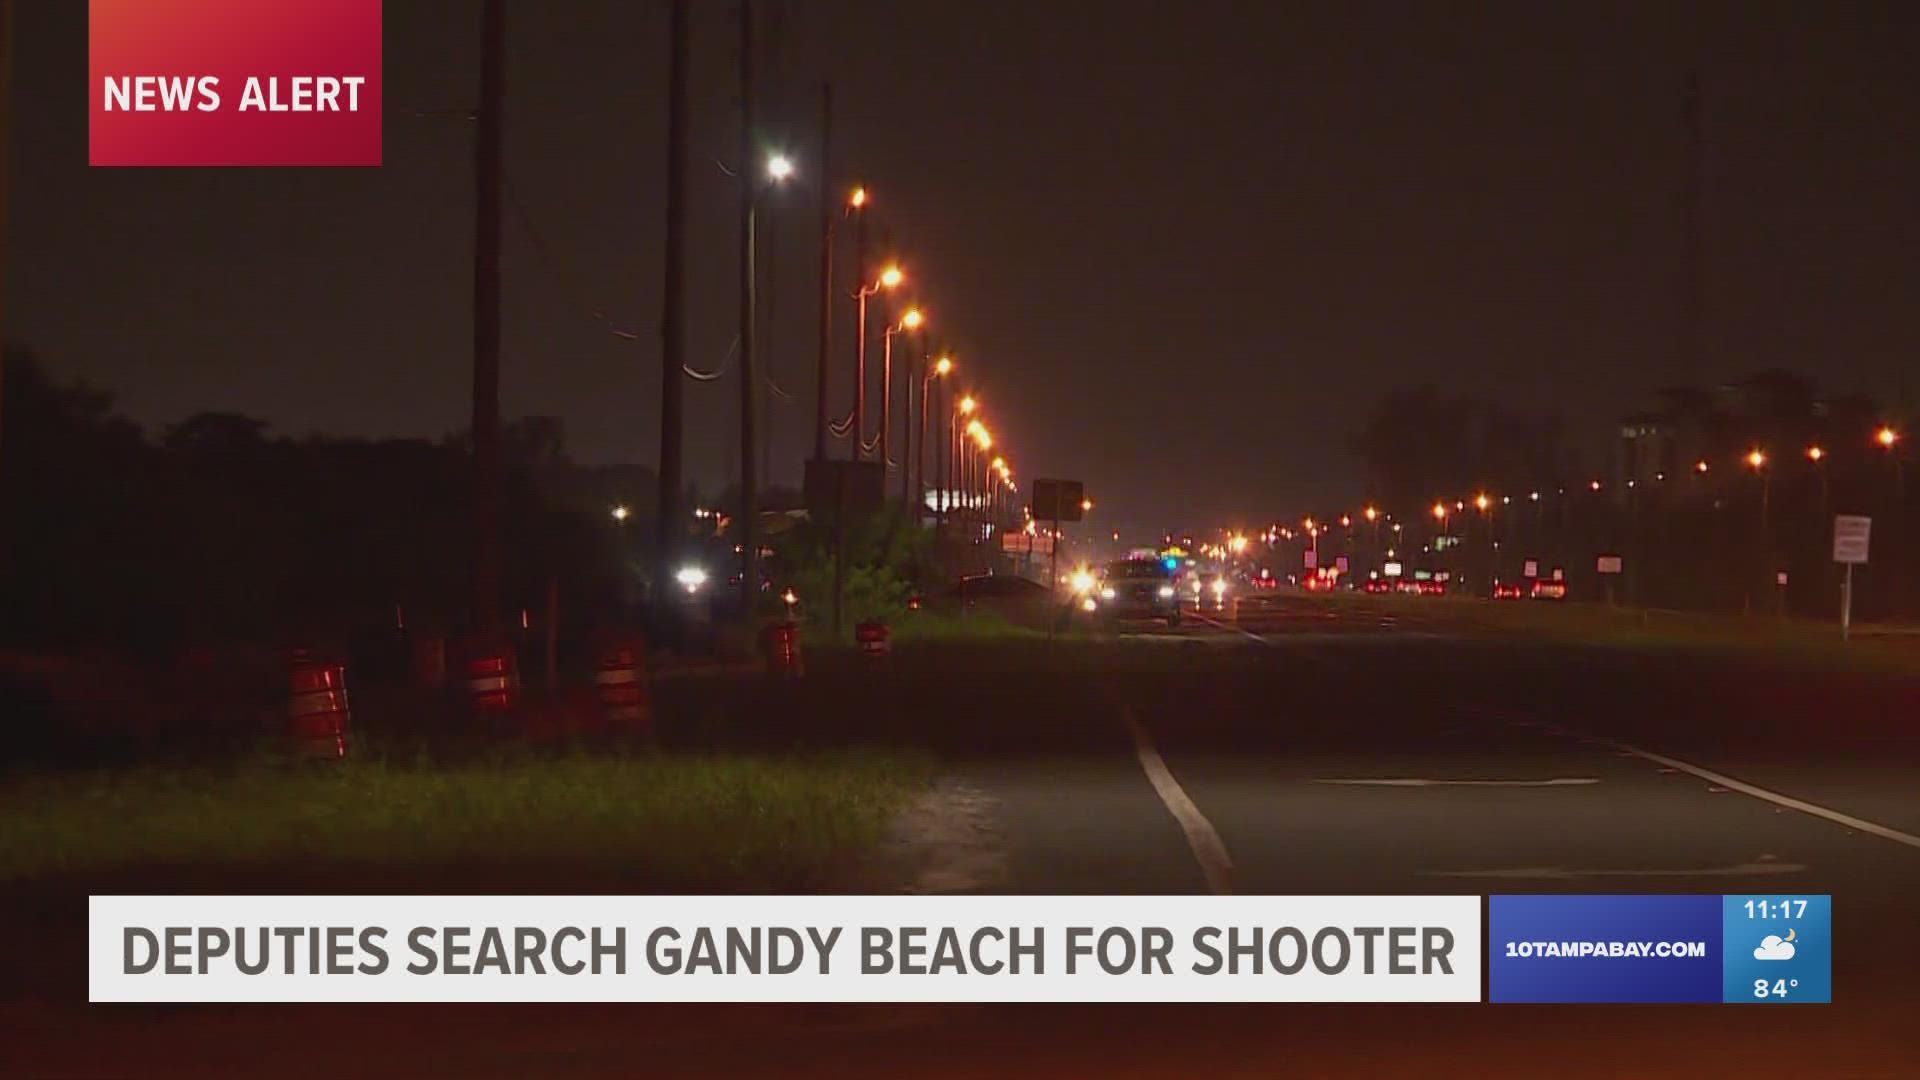 There were no injuries during the reported shooting, Pinellas County Sheriff's Office says.